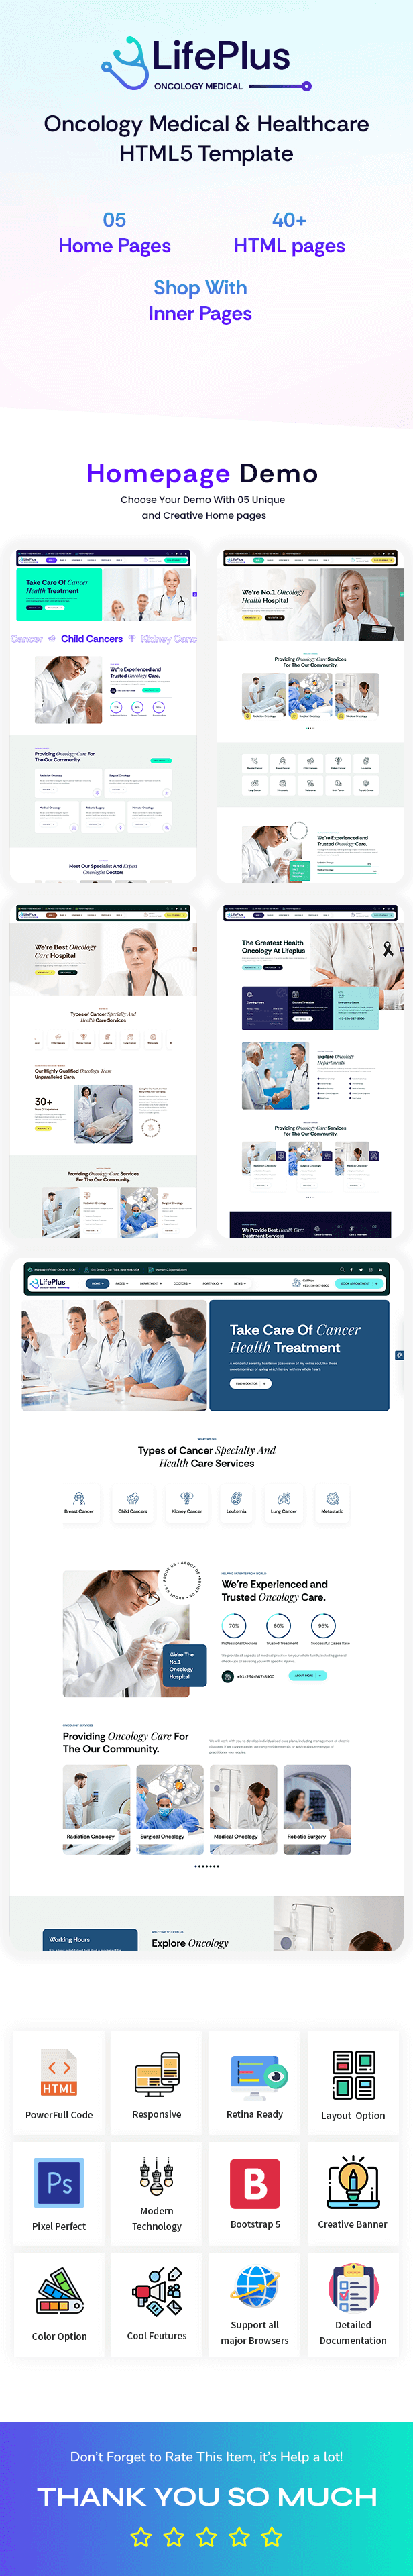 Lifeplus - Oncology Medical & Healthcare HTML5 Template - 1